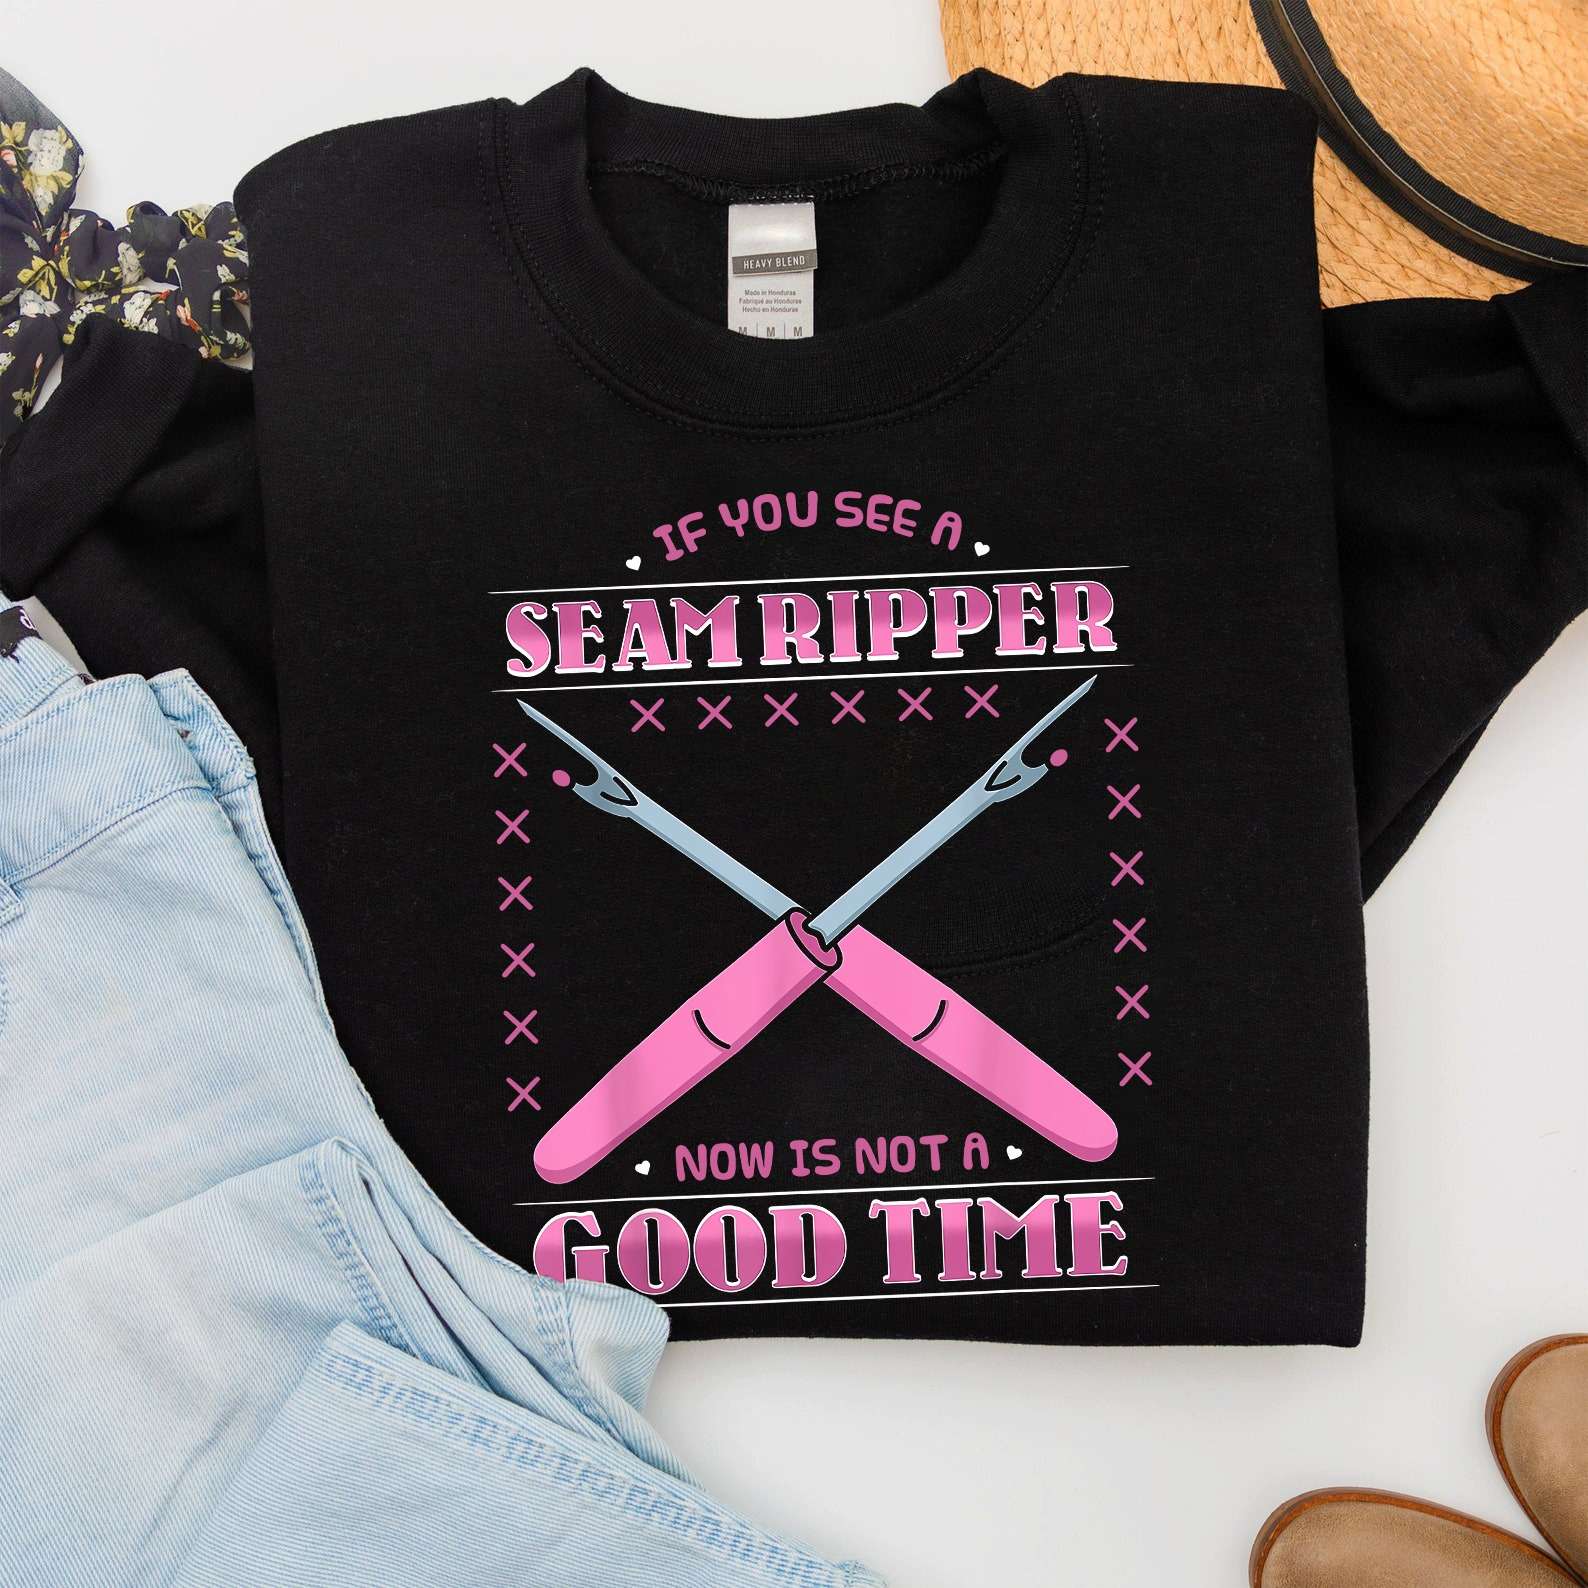 If you see a seamripper now is not a good time - Seam ripper sewing, gift for sewing people